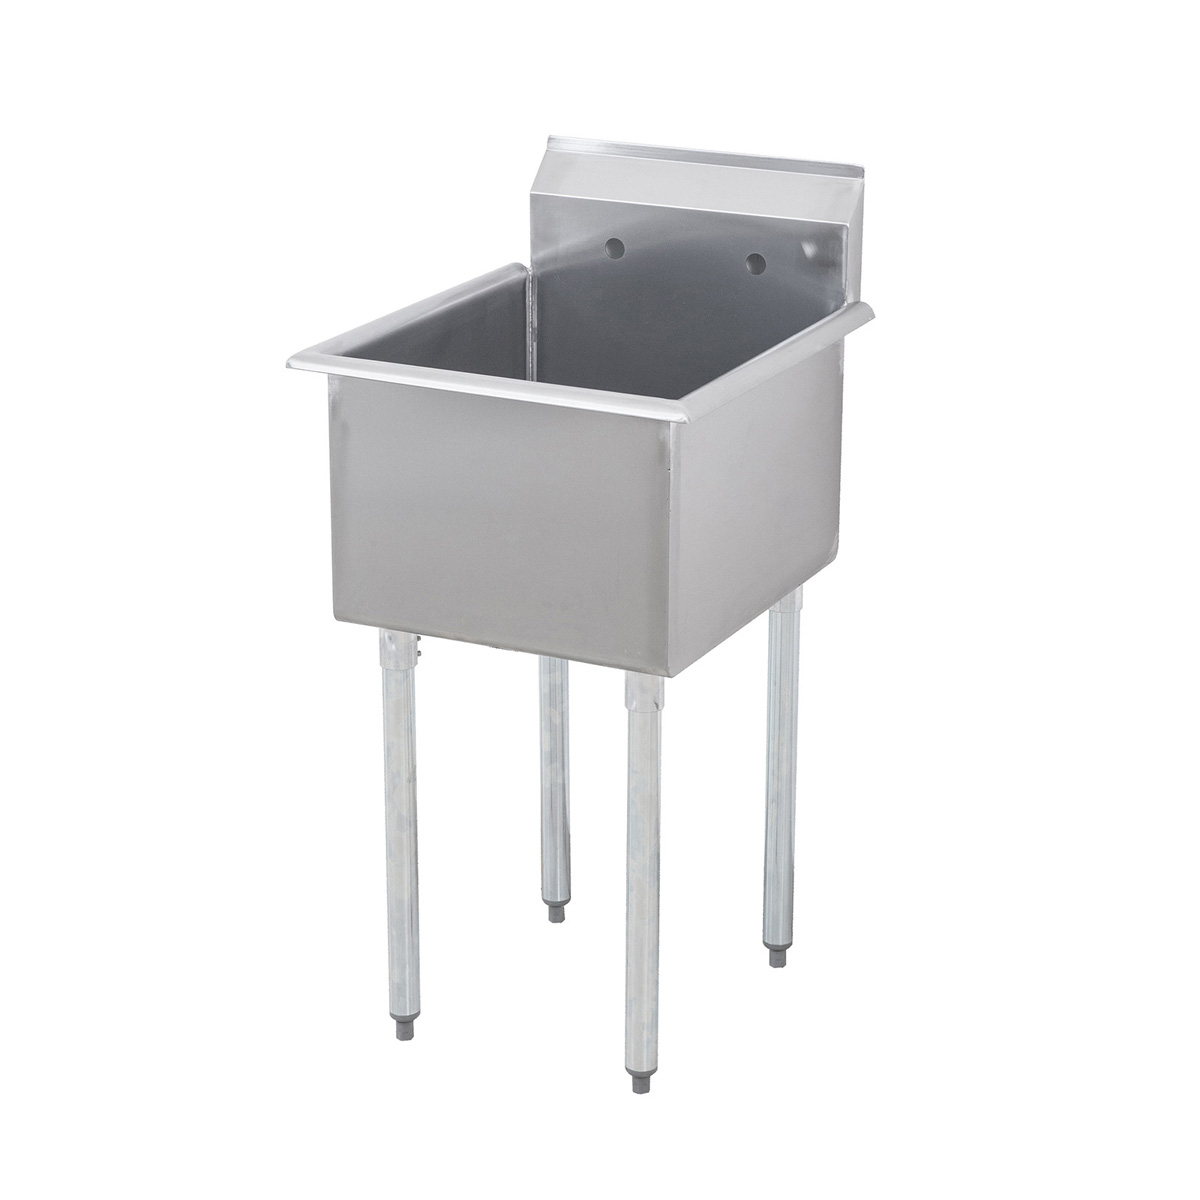 SK1412-1 One Compartment Utility Sink 15"outside include drainer And Faucet. 